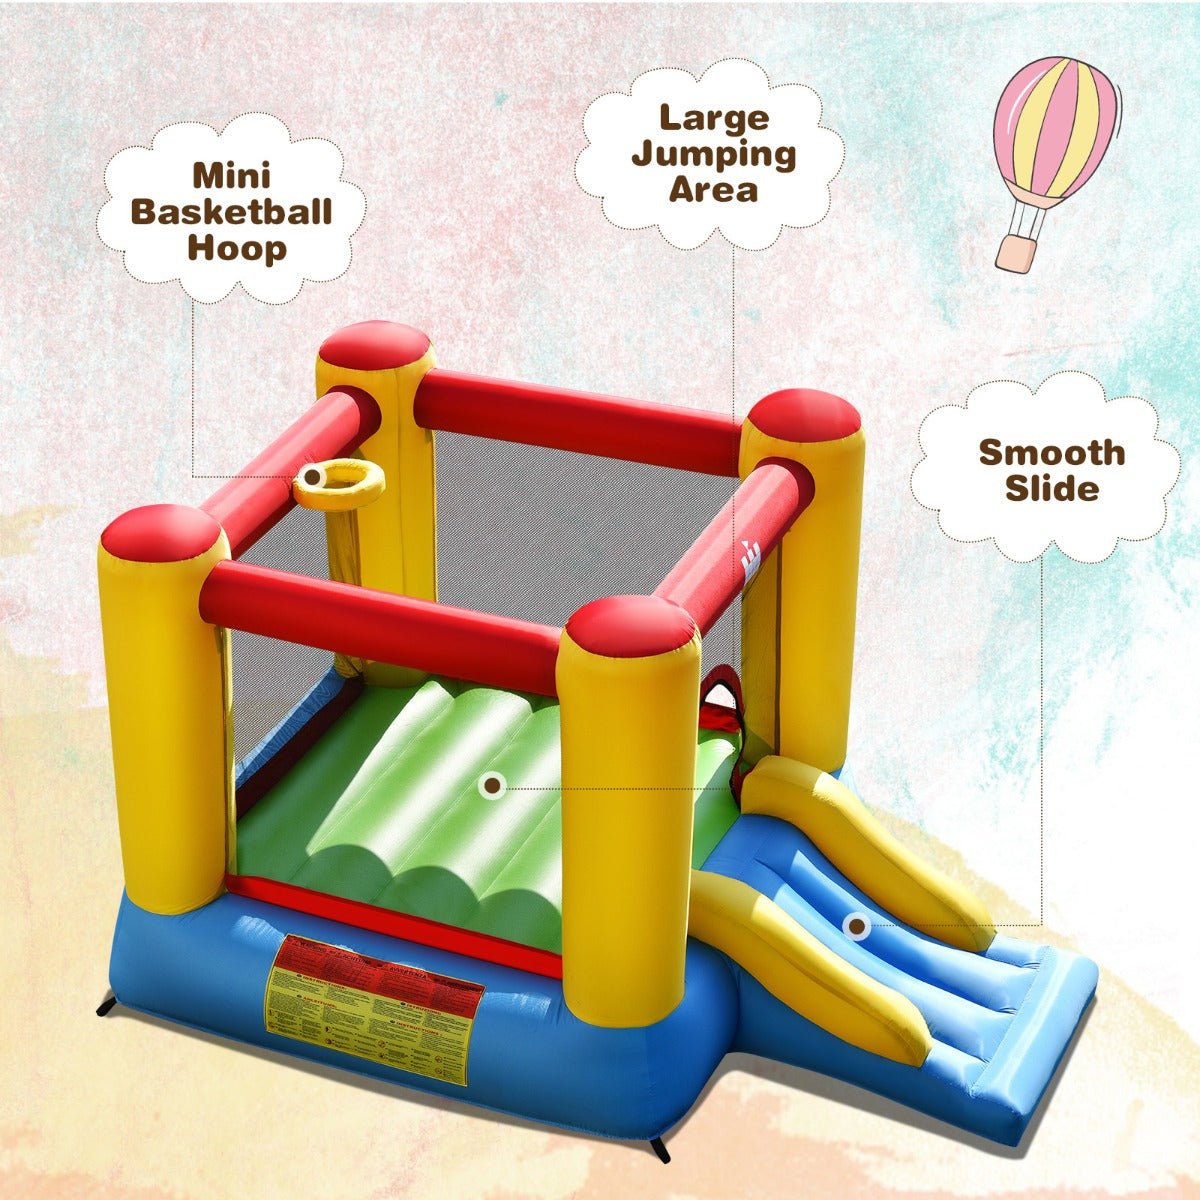 Kids Inflatable Jumping Castle - Slide, Basketball Hoop, and Excitement